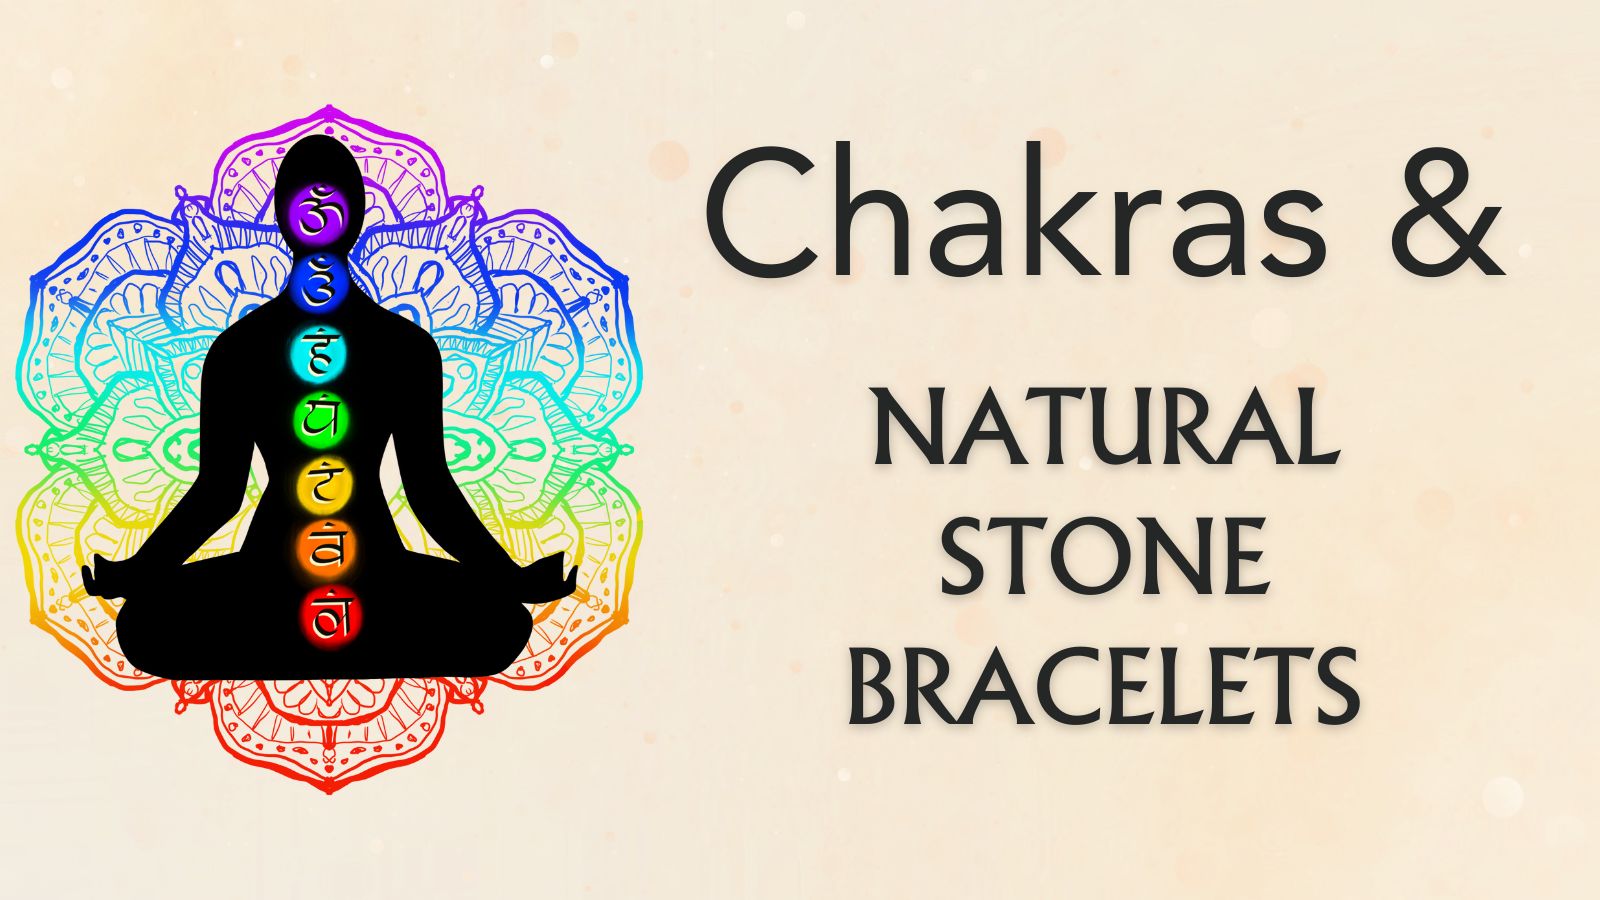 The Connection Between Chakras and Natural Stone Bracelets